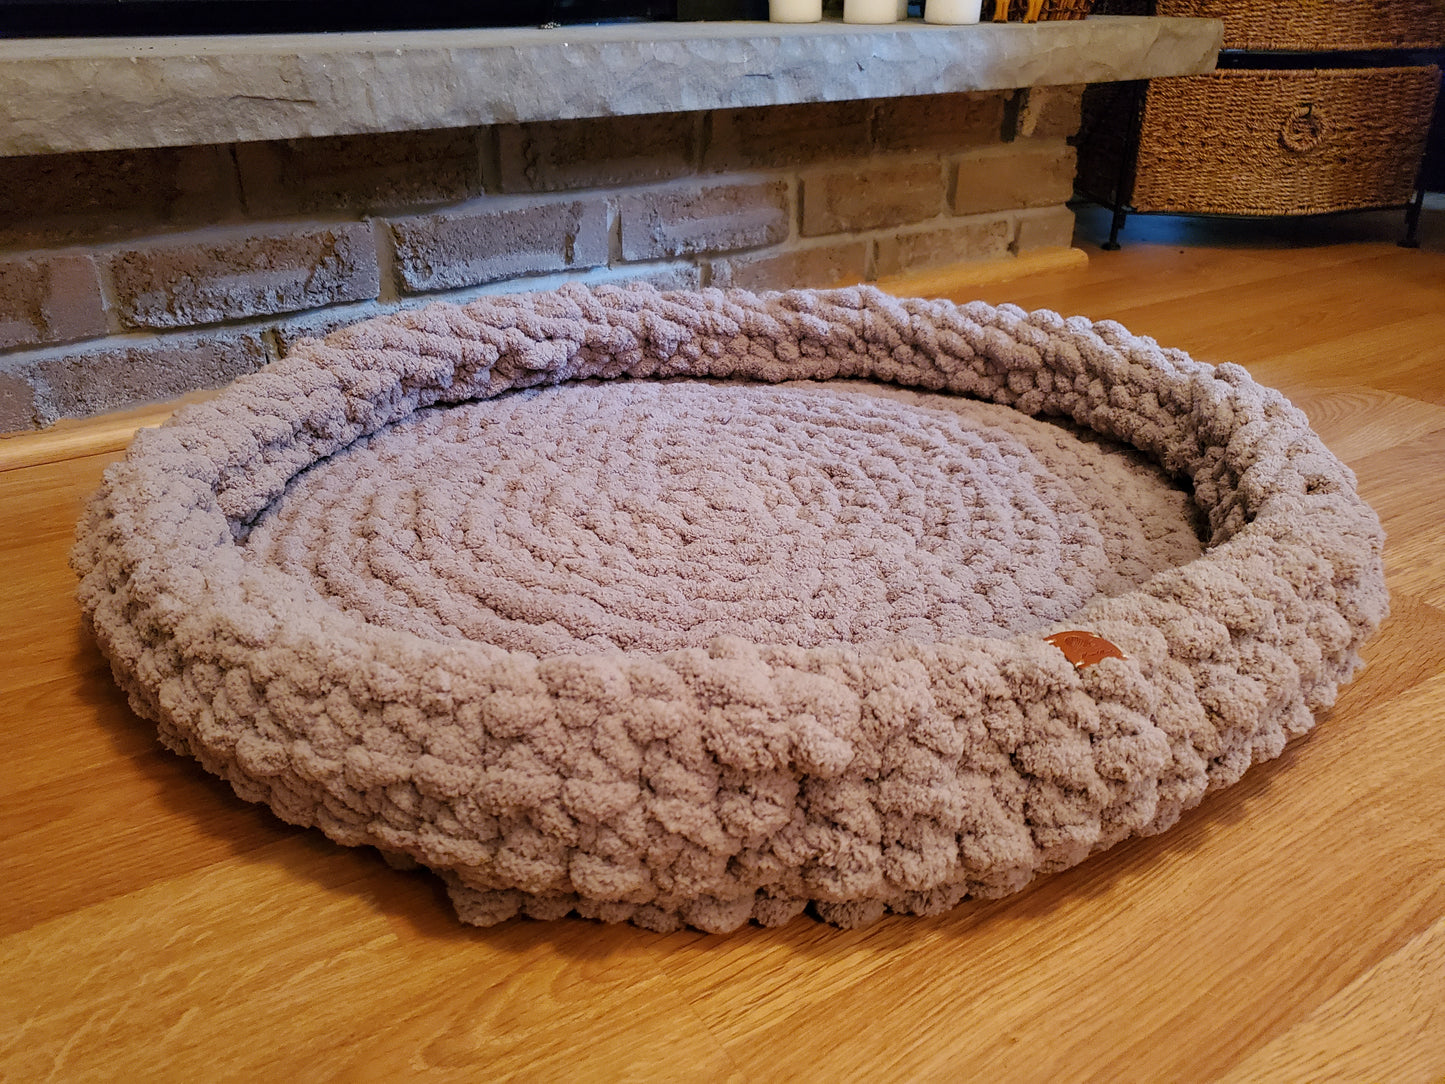 36" Dog Bed | Large Size Chenille Wool Pet Bed